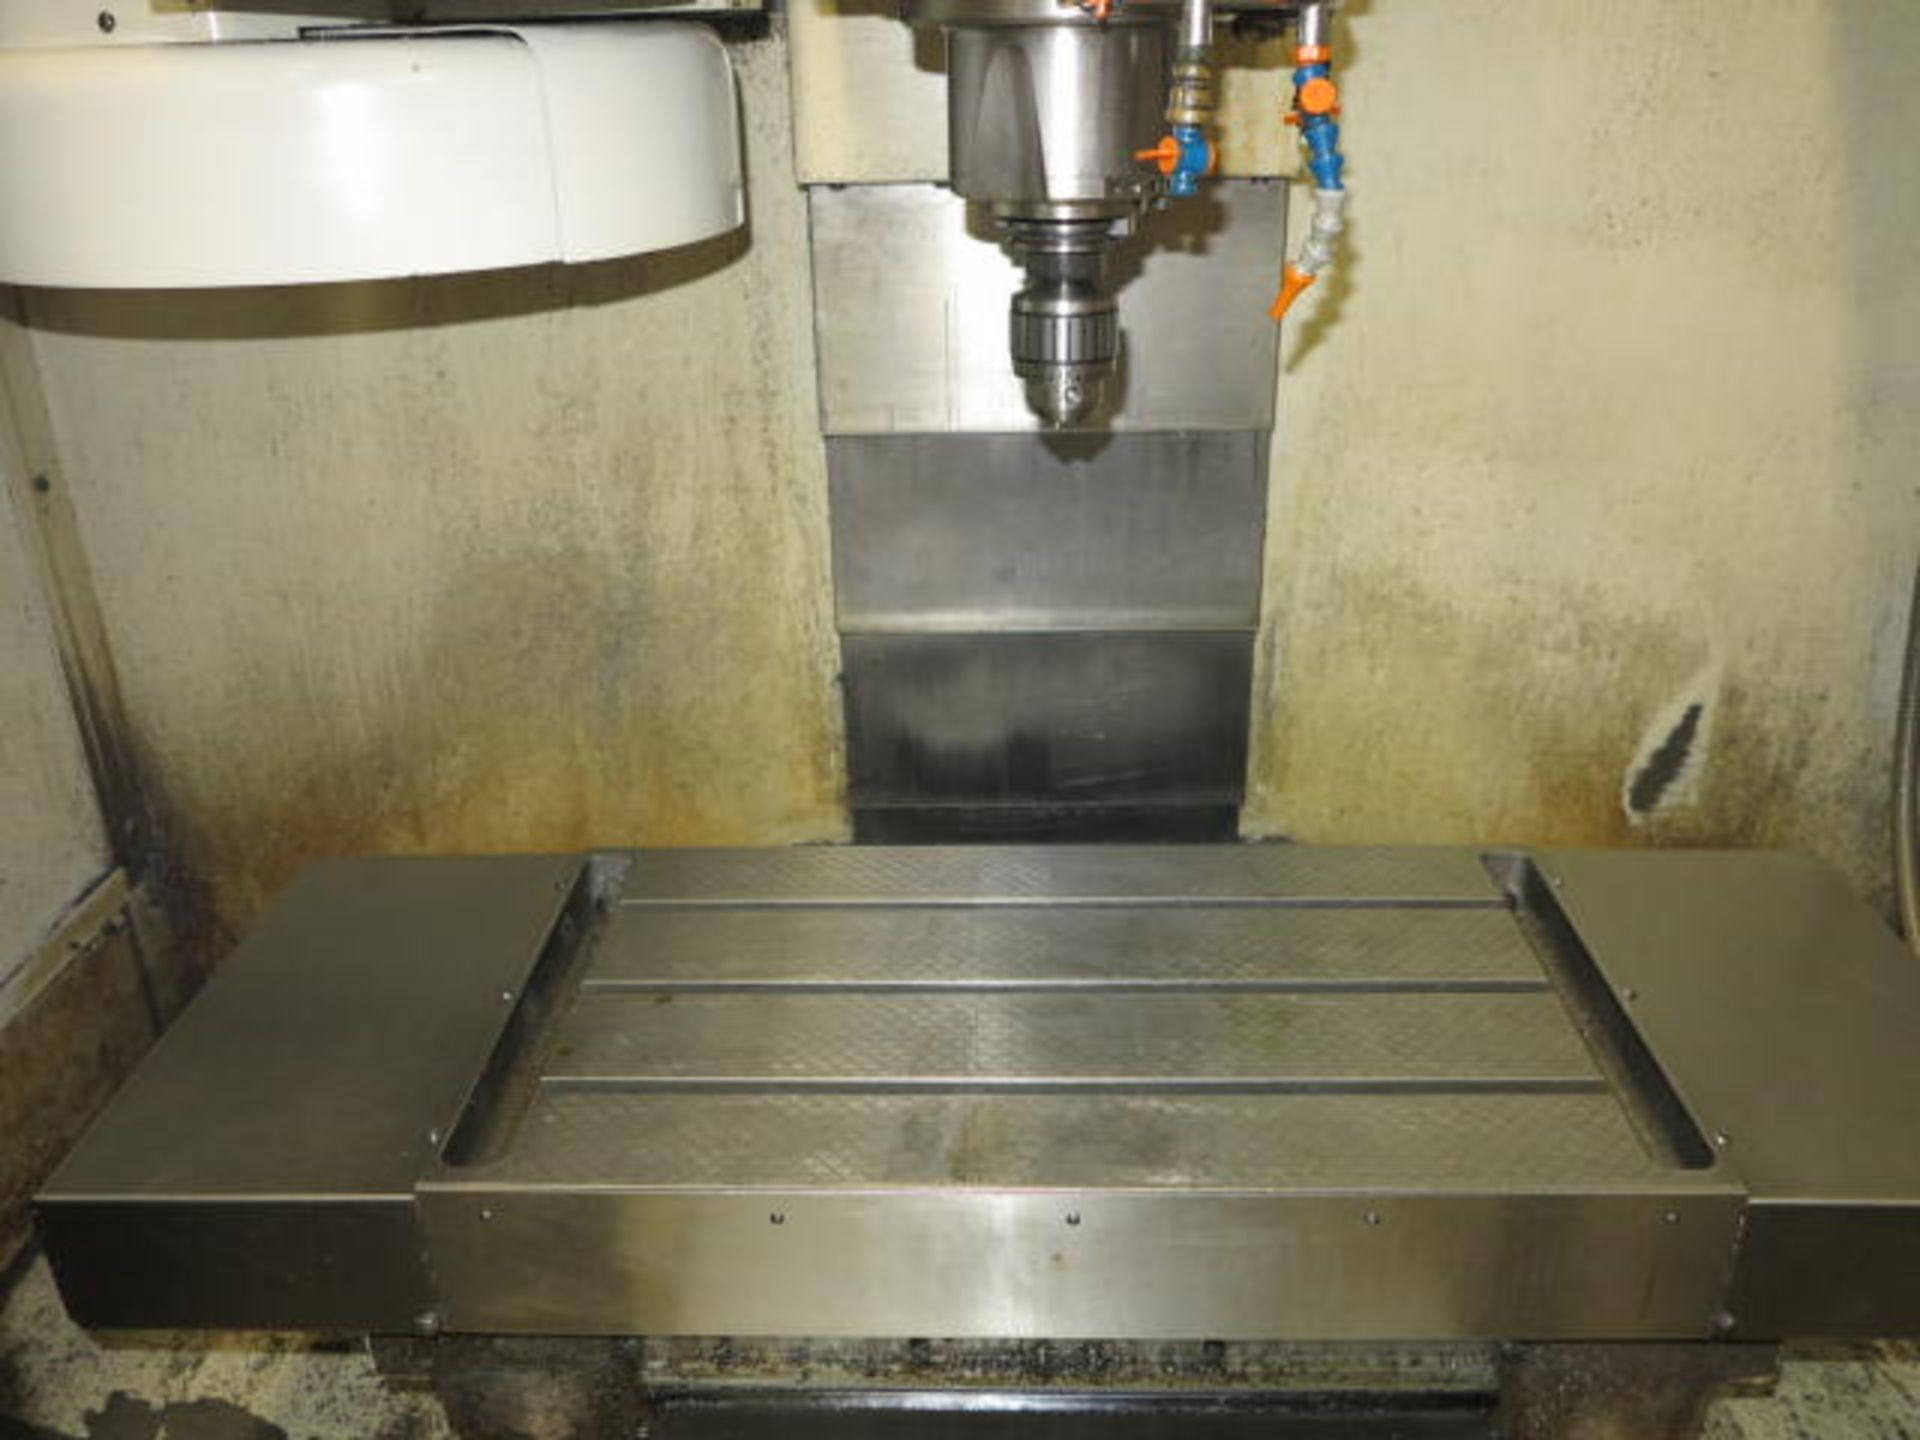 1994 Fadal 914-15 Vertical Machining Center BMC15 S/N 9405239 with Fadal CNC 88HS Controls - Image 2 of 7